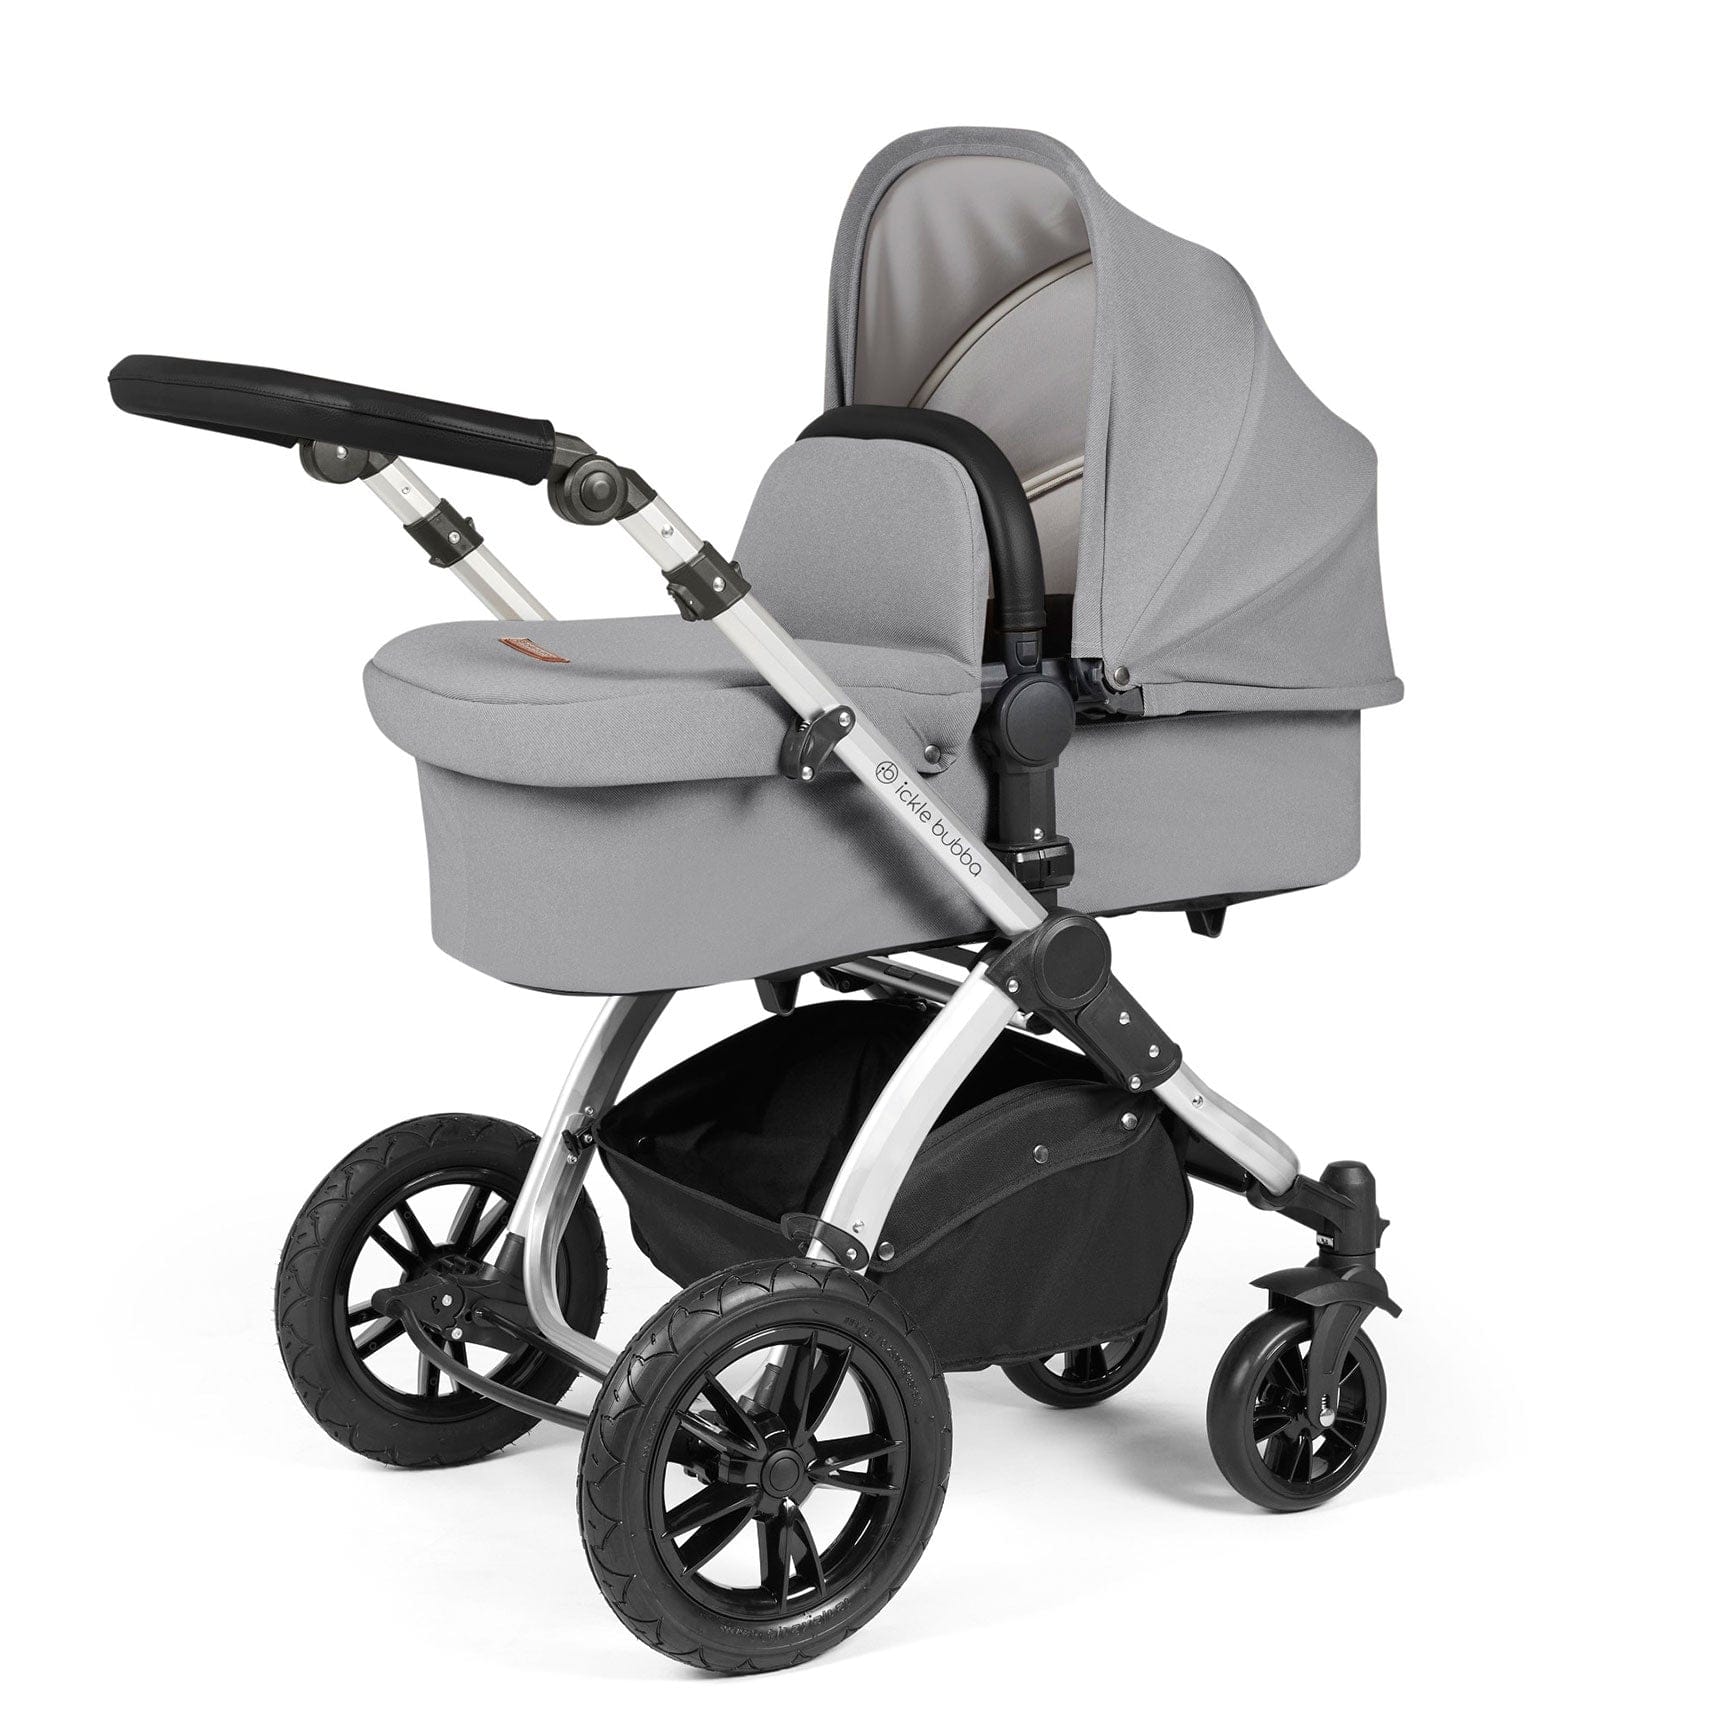 Ickle Bubba travel systems Ickle Bubba Stomp Luxe All-in-One Travel System with Isofix Base - Silver/Pearl Grey/Black 10-011-300-259